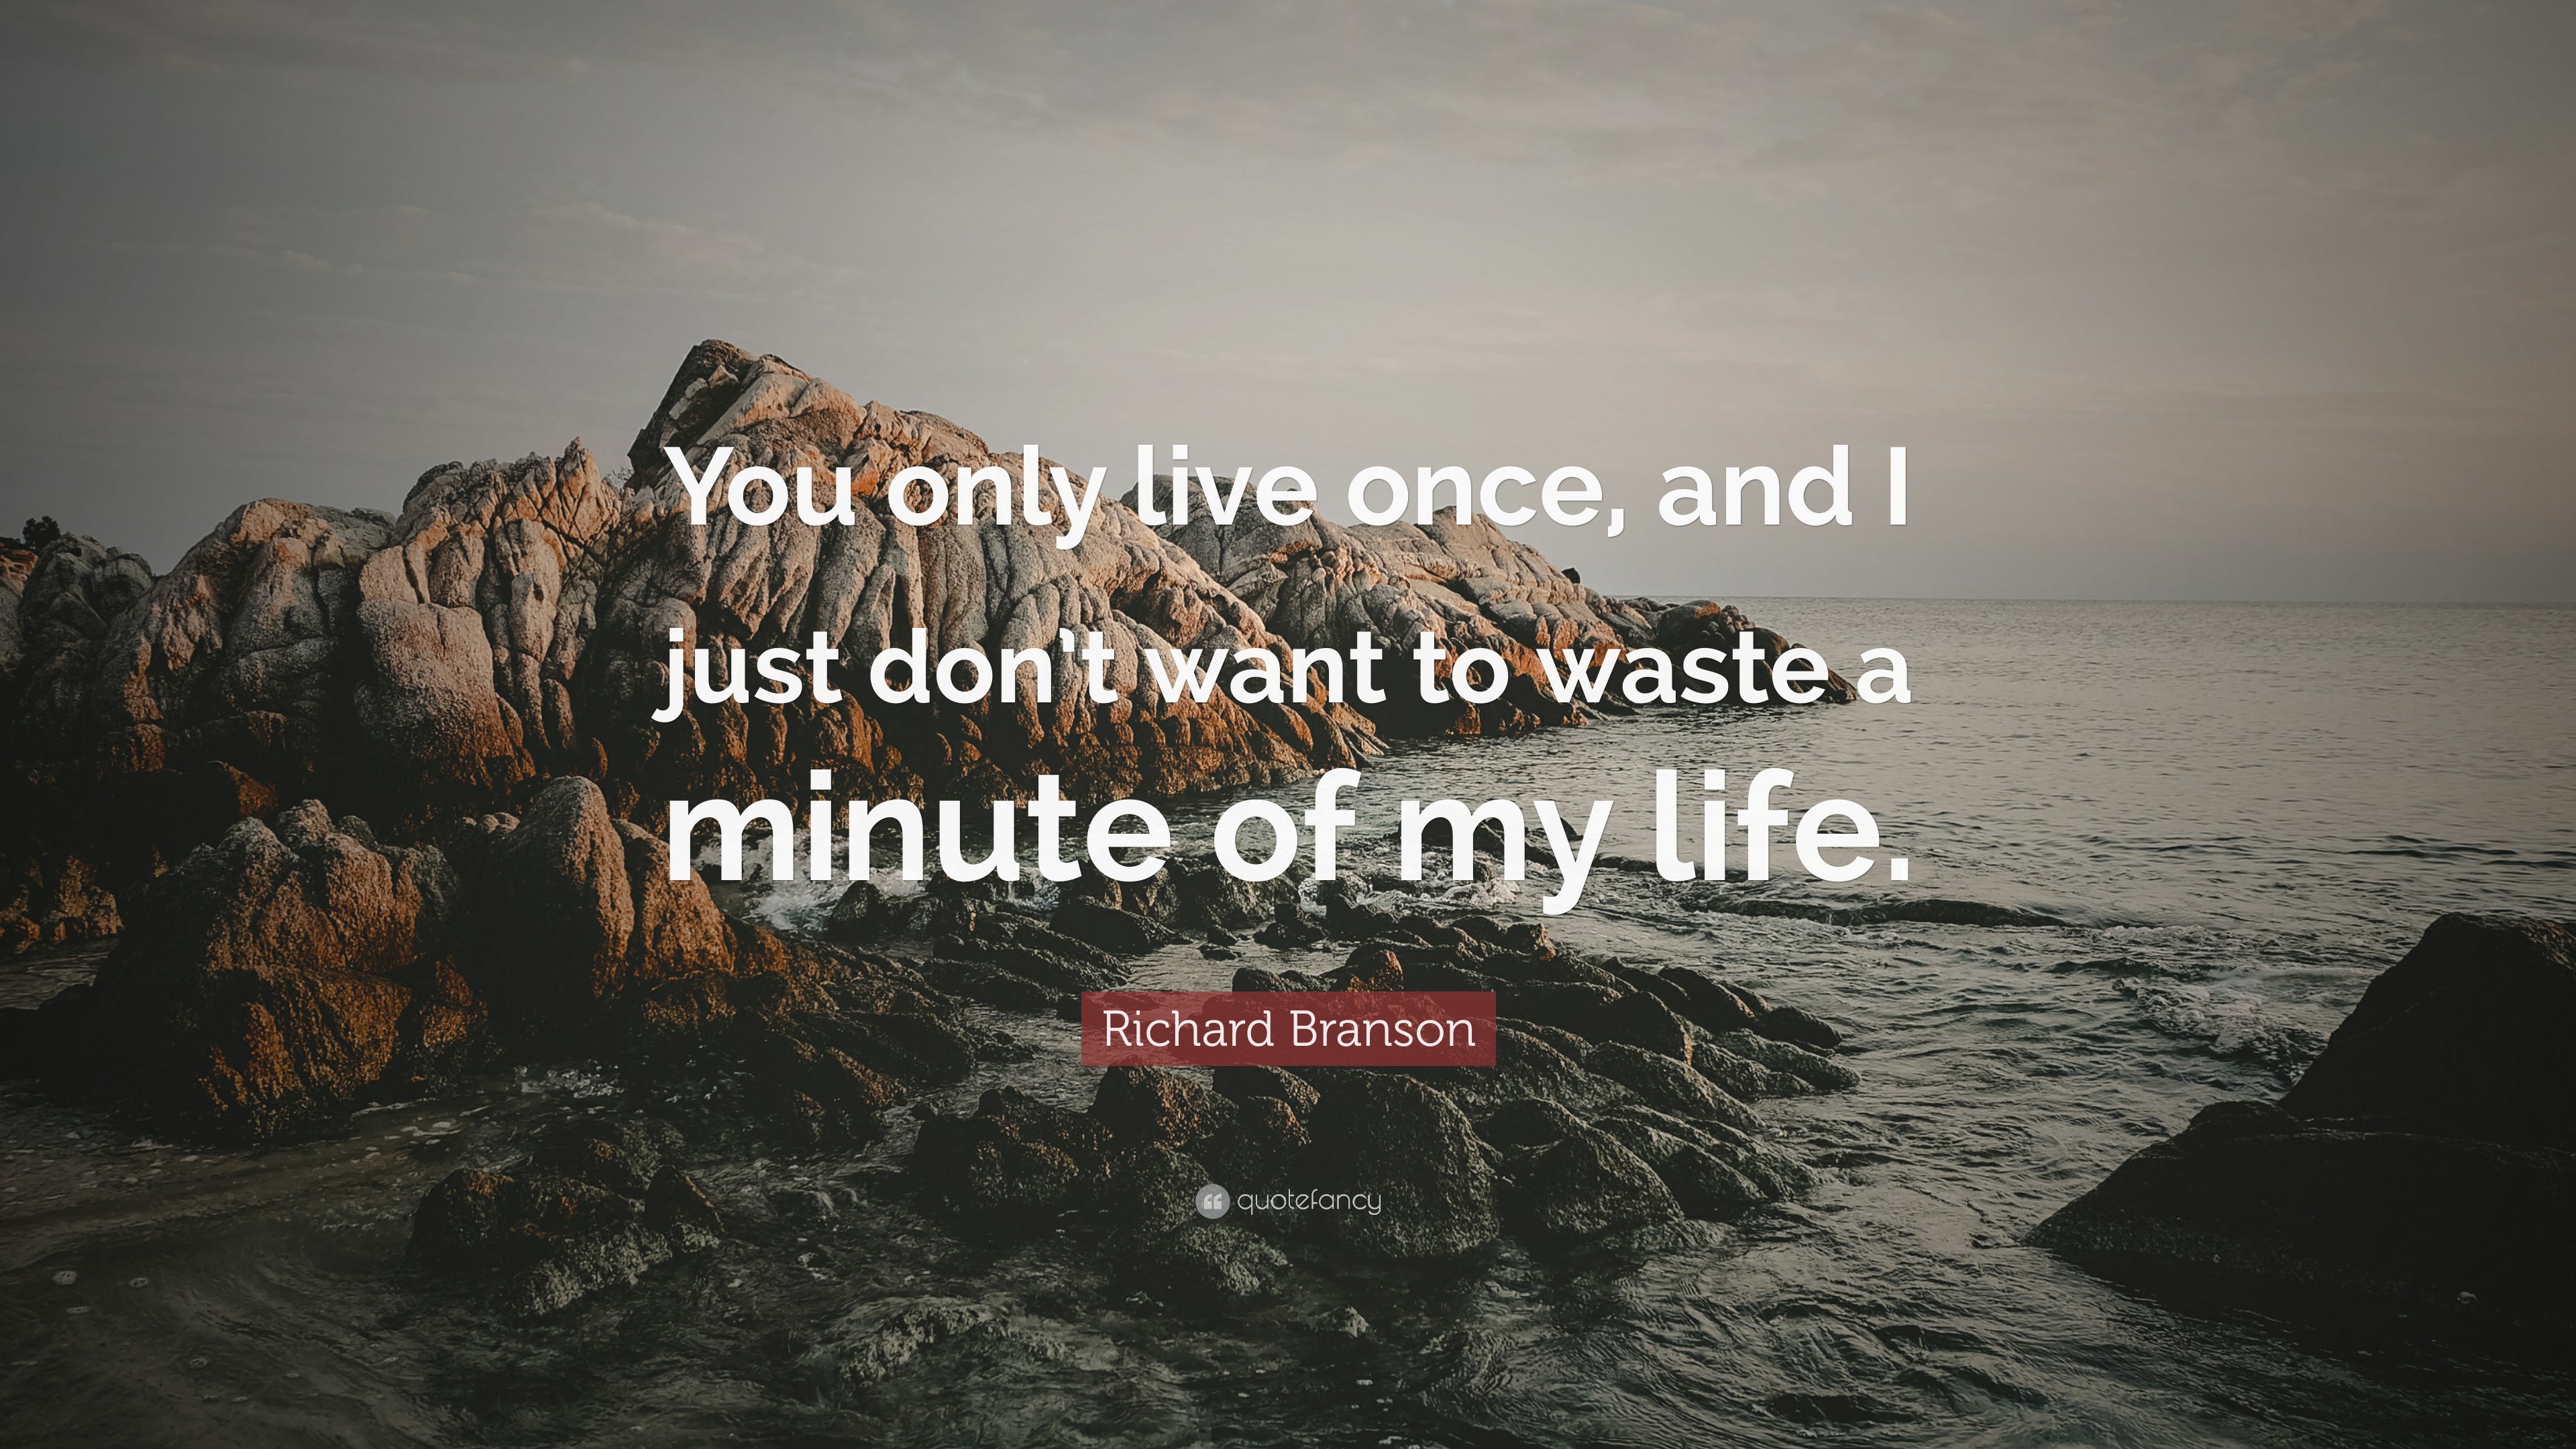 Richard Branson Quote “You only live once and I just don t